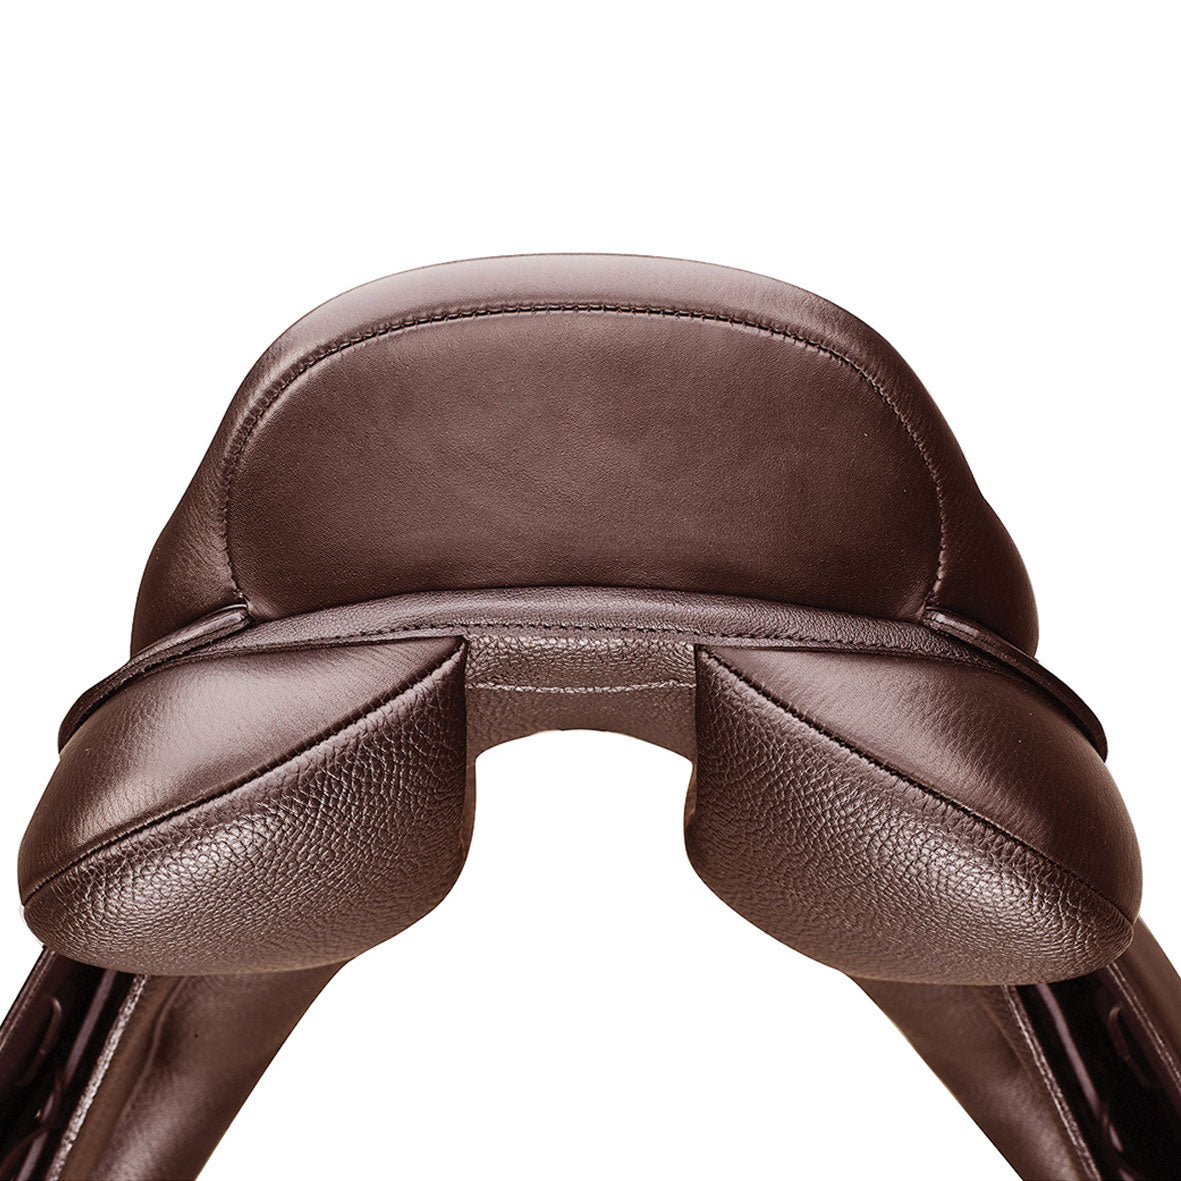 Arena "High Wither" All Purpose Saddle